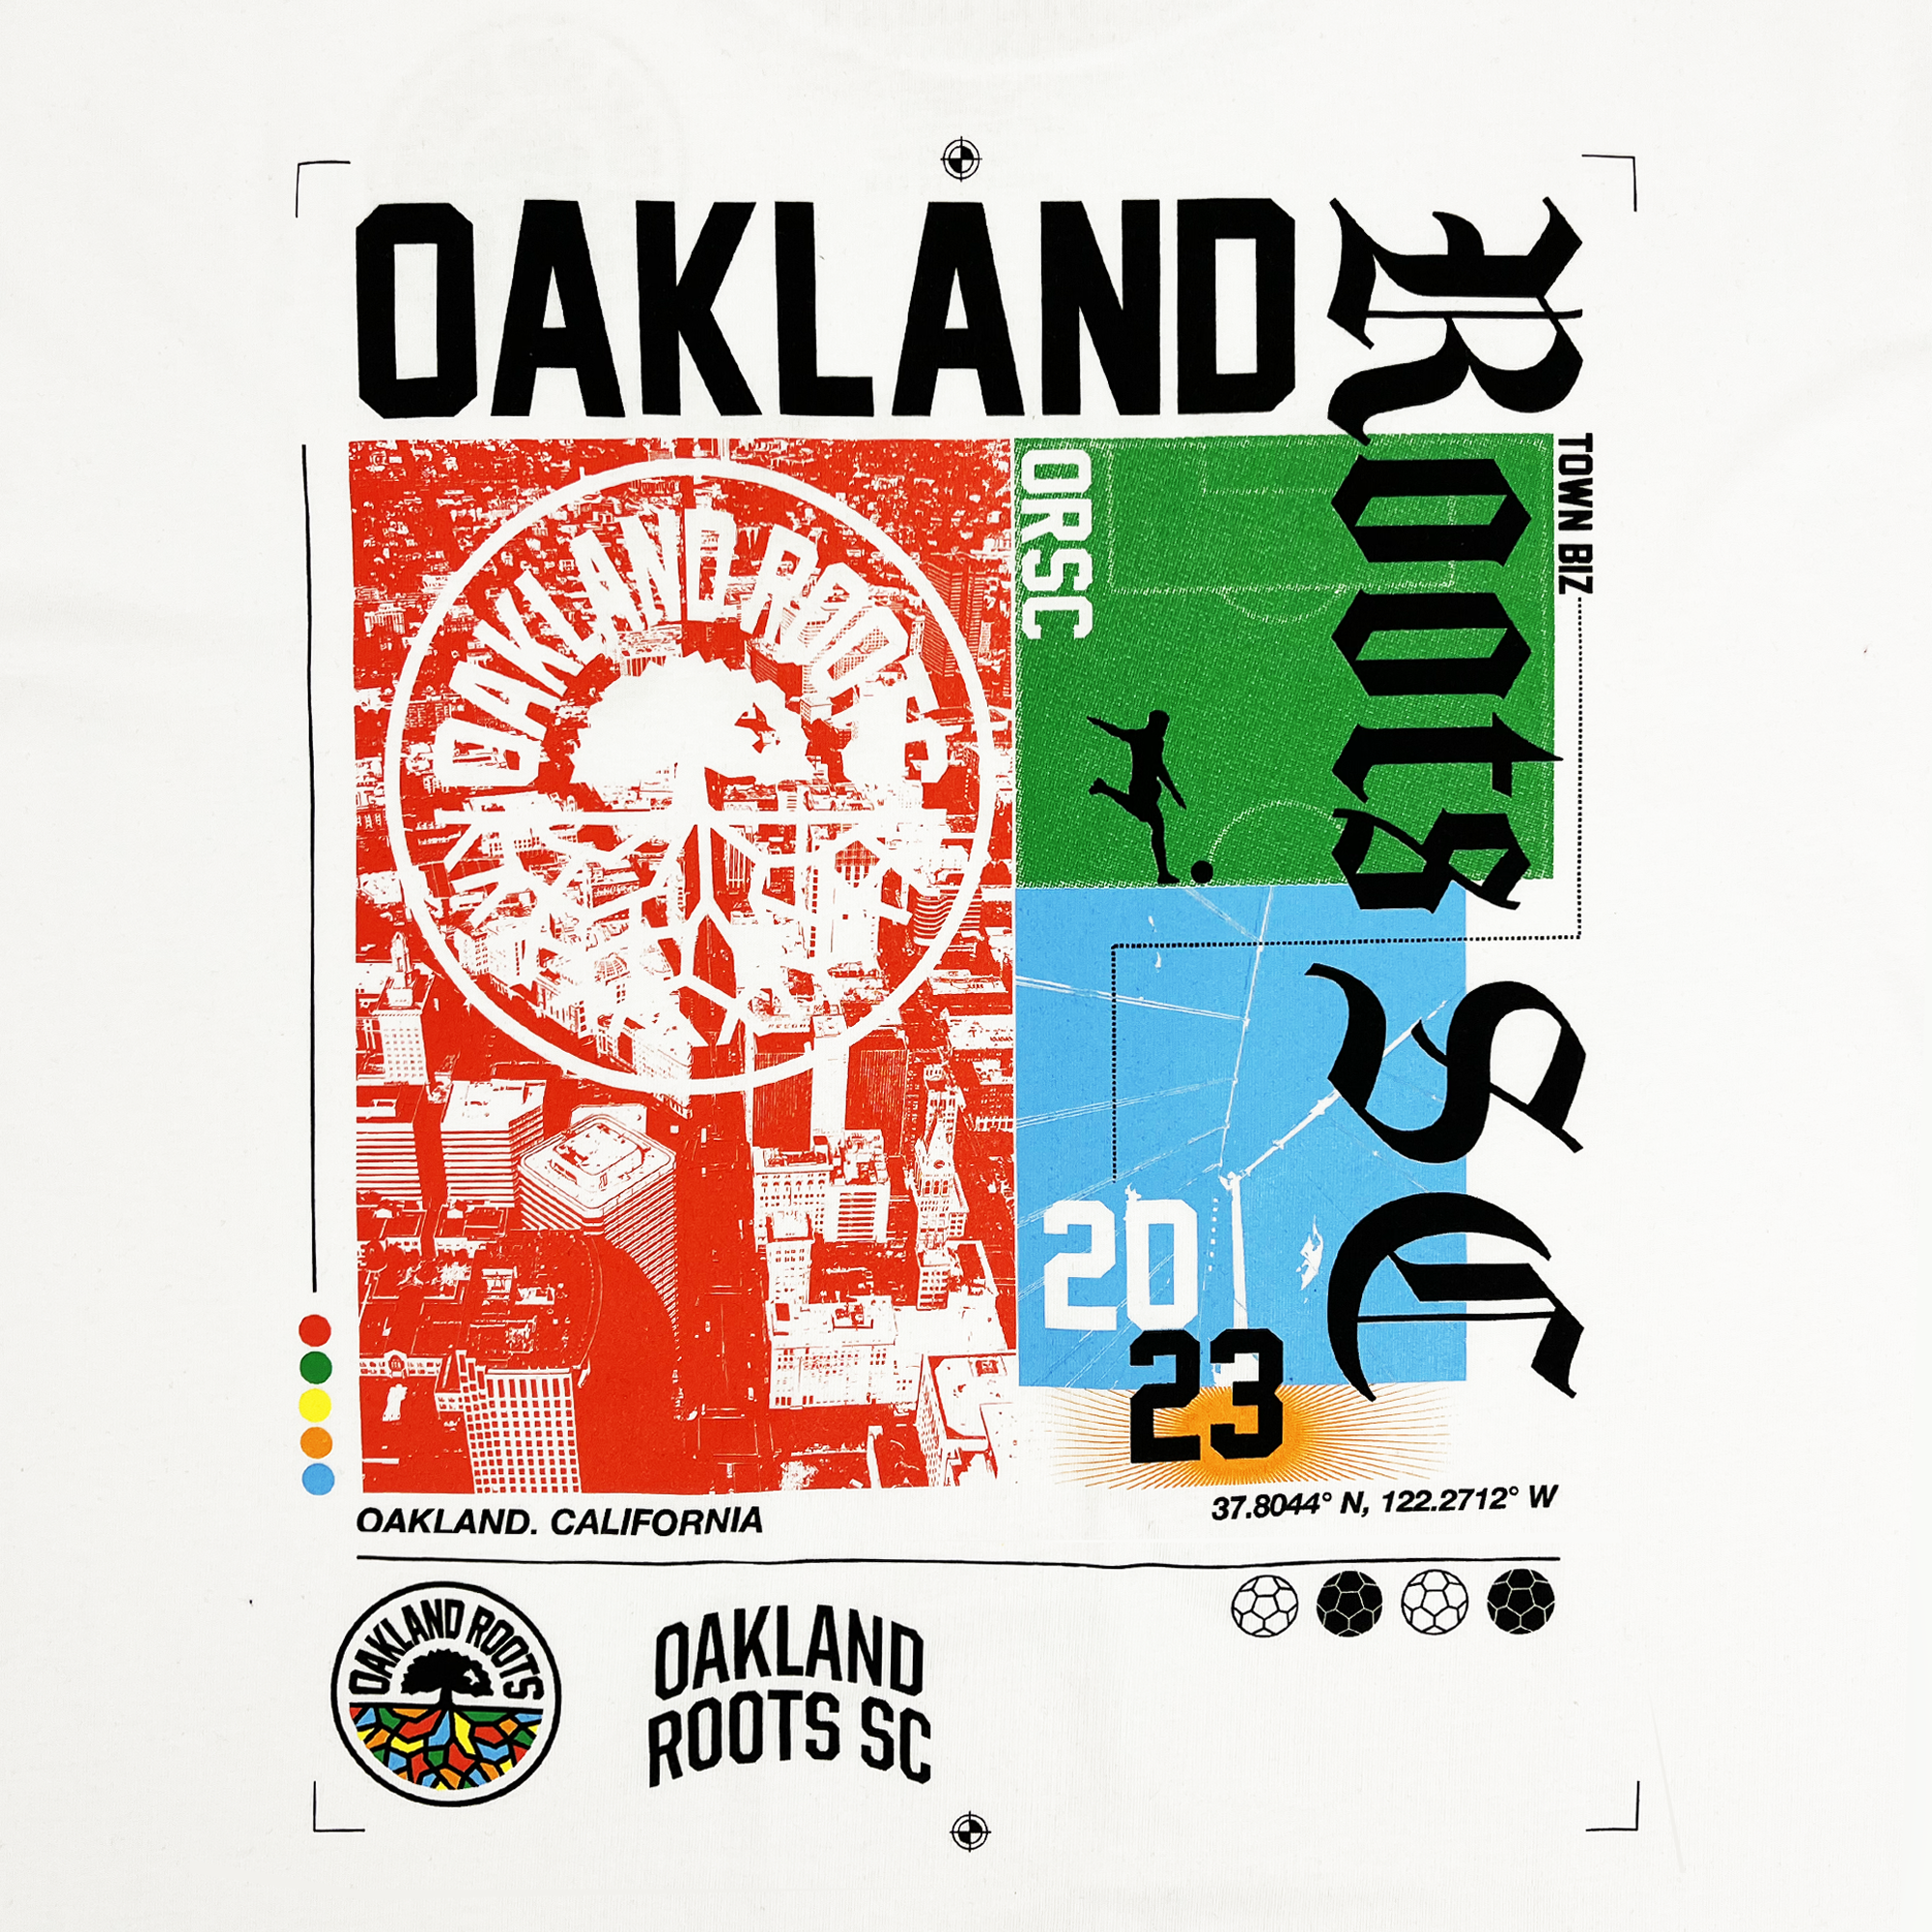 Close-up of full-color Oakland Roots SC graphic with logos and wordmarks on the back of a white t-shirt.